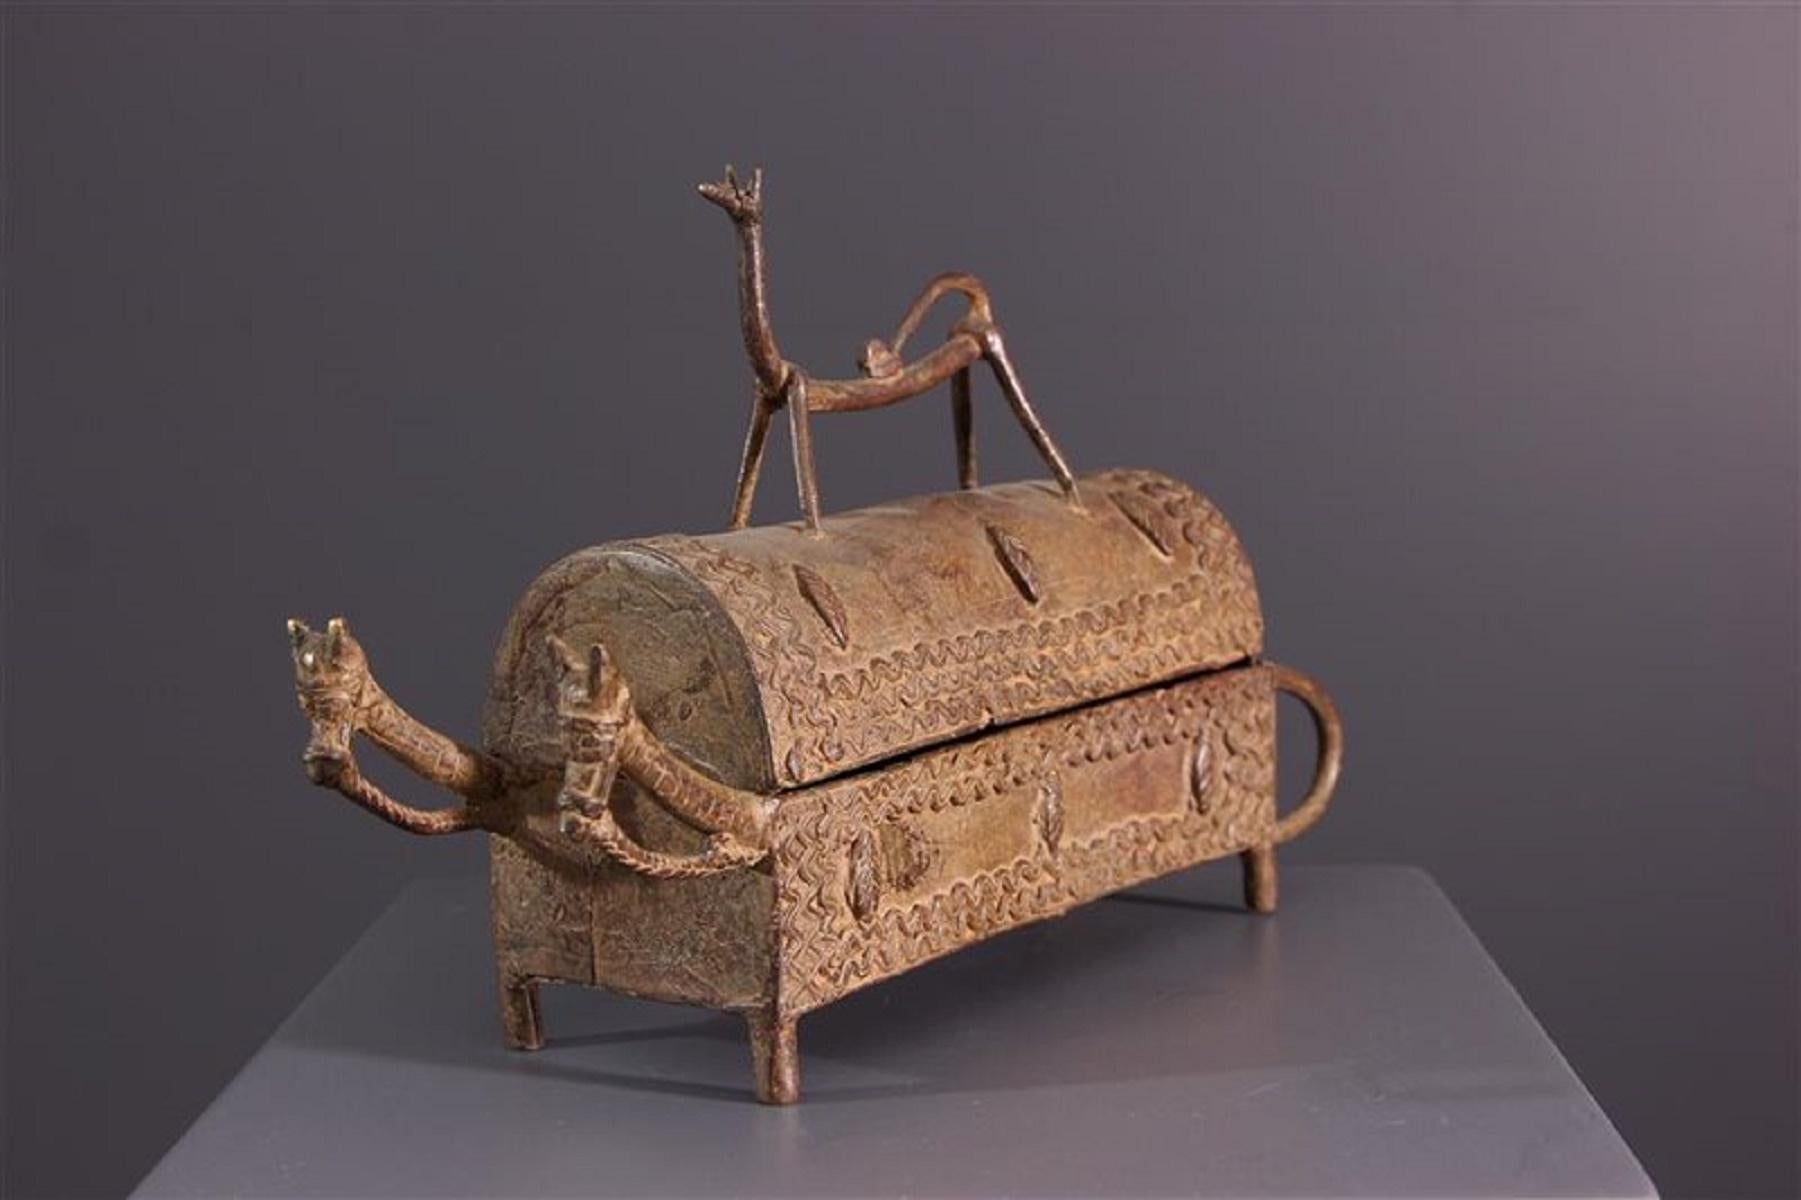 Bronze Dogon Box in wonderful original condition
(Ex-collection of French African art)
The frequent representations of horsemen in the African art of the Dogon of Mali refer to their cosmogony and complex religious myths. 
One of the Nommos,